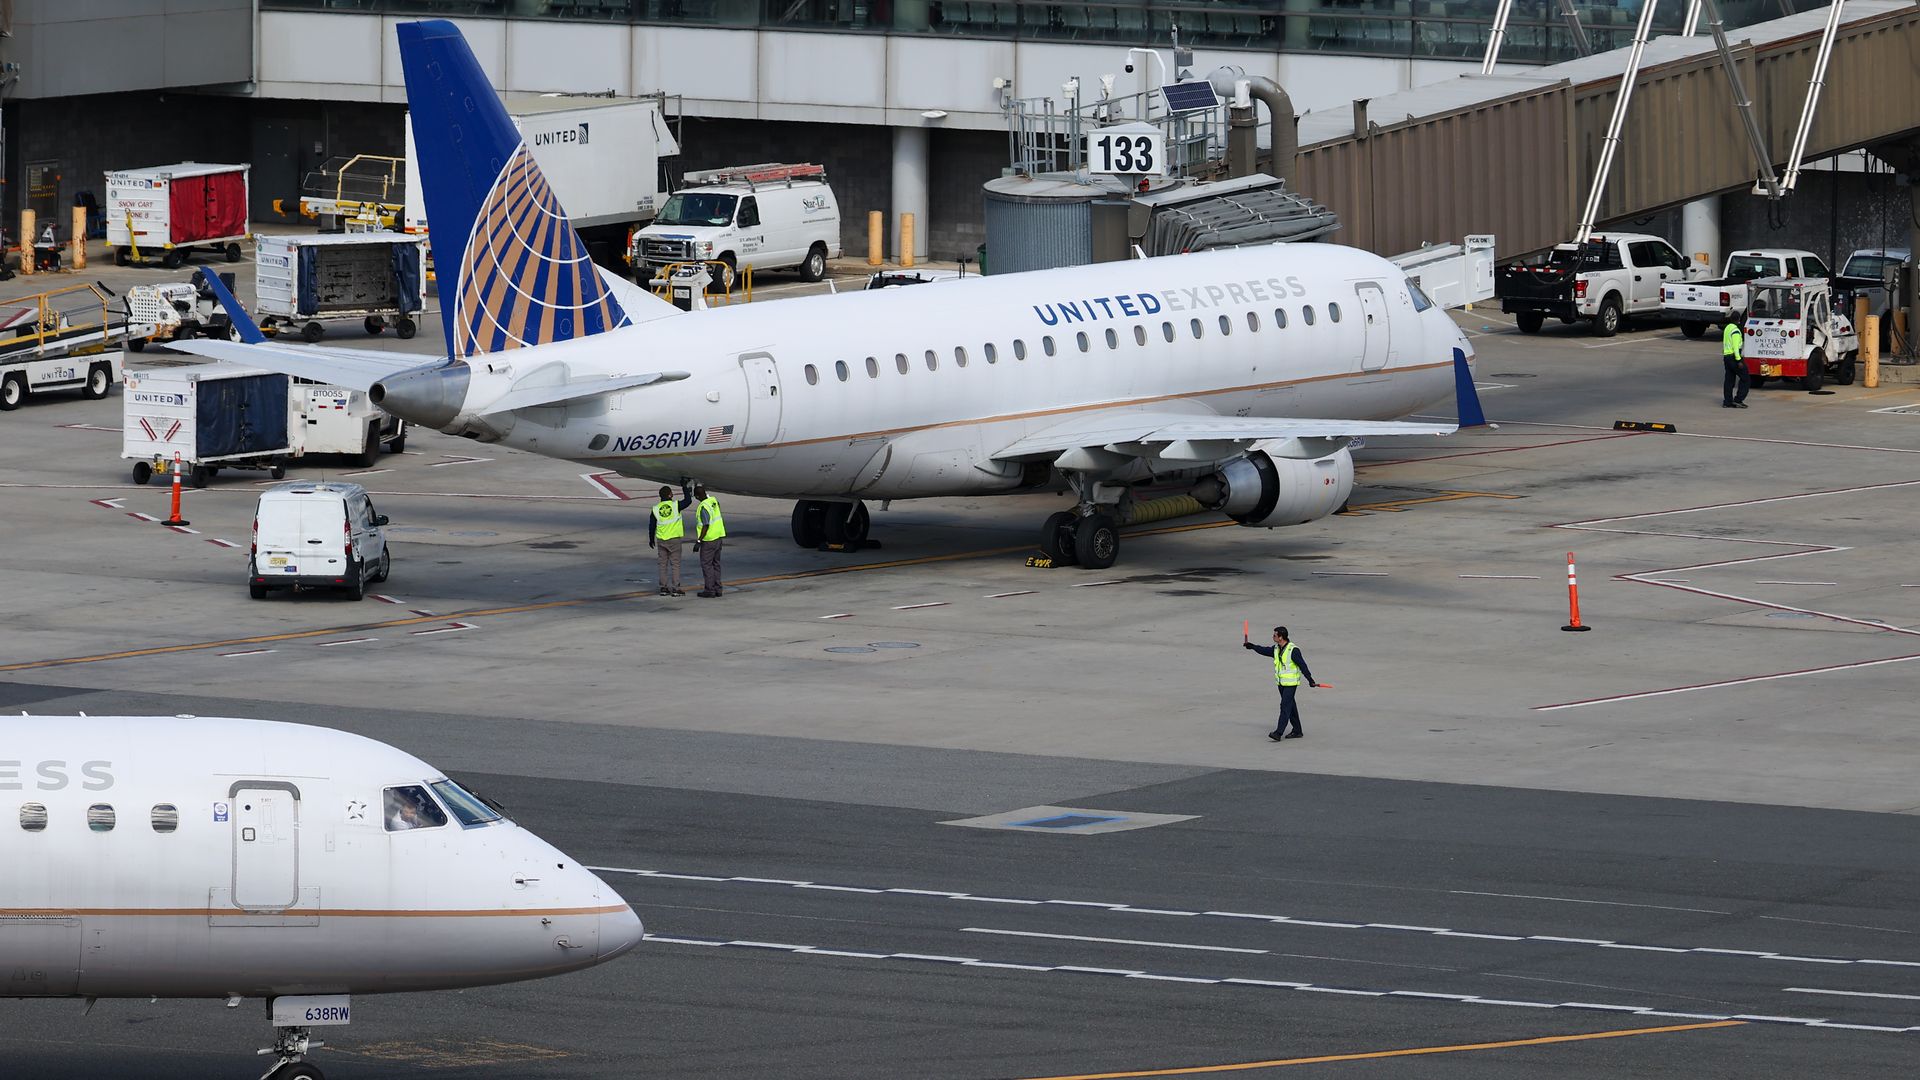 United Airlines planes are seen at Newark International Airport in New Jersey, United States on September 29